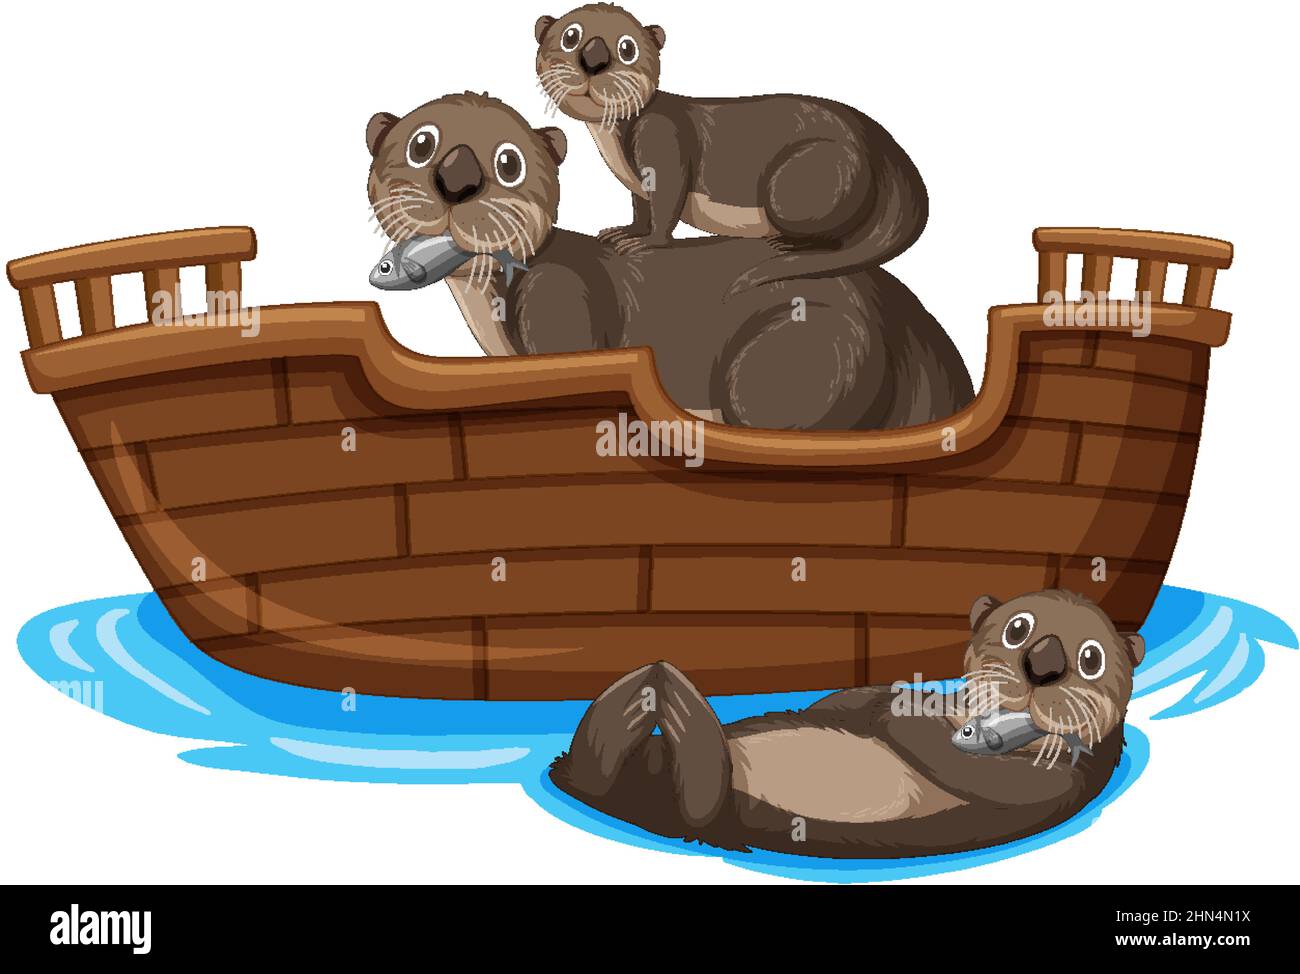 Otters on wooden boat in cartoon style illustration Stock Vector